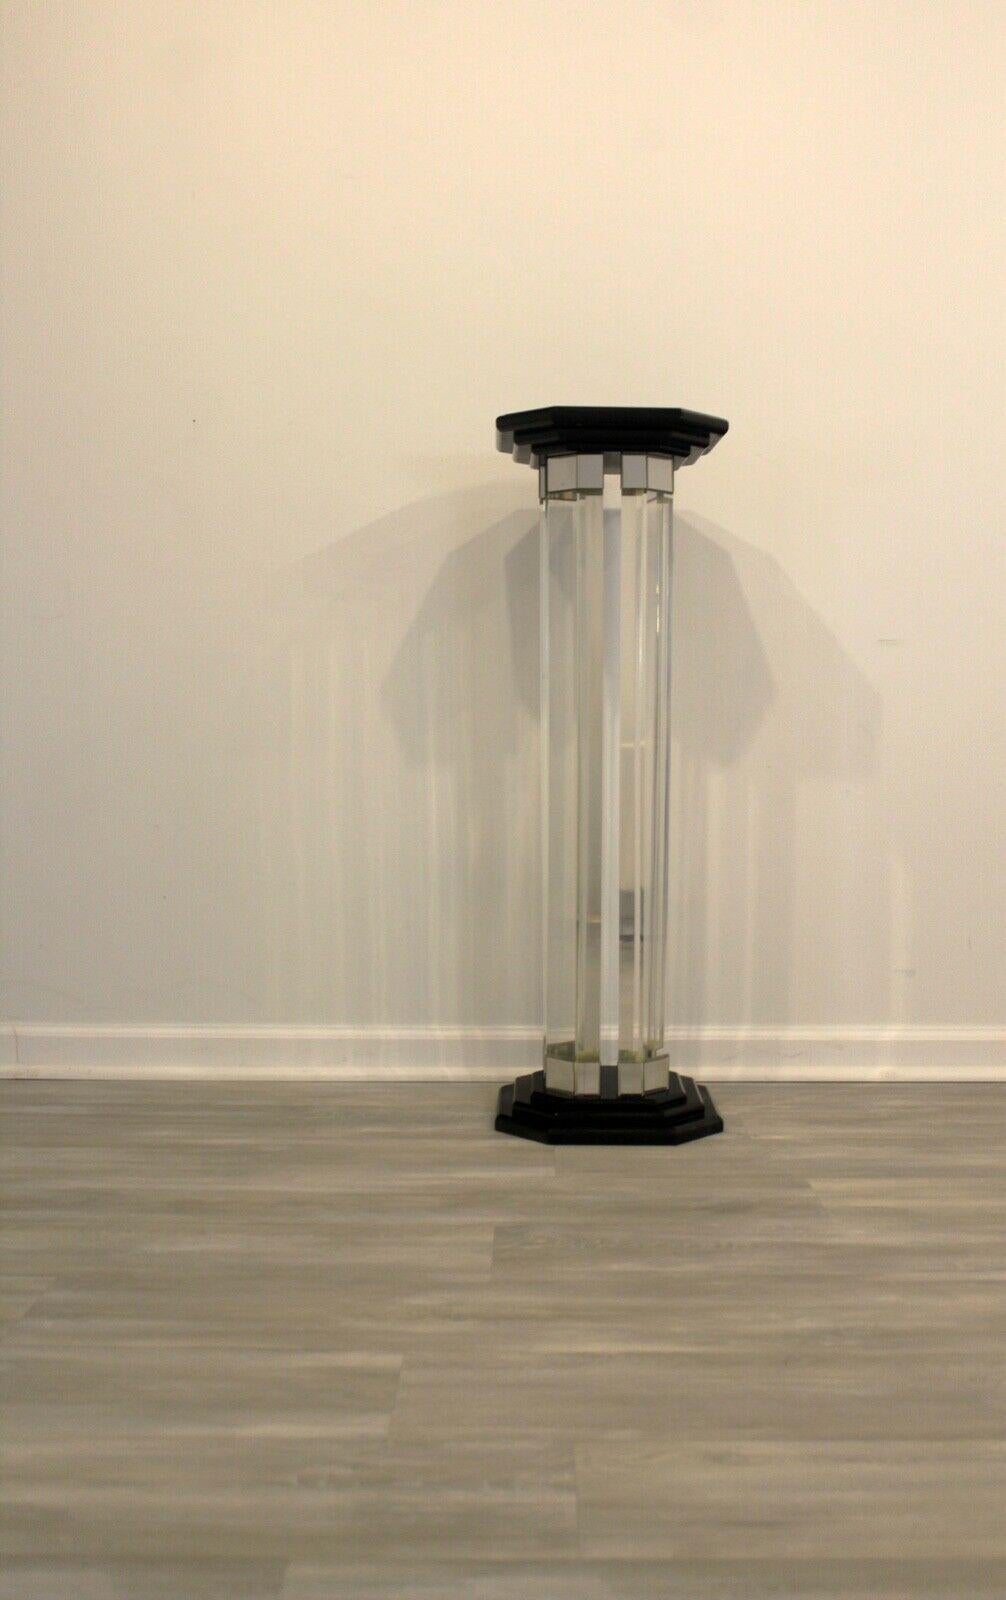 From Le Shoppe Too in Michigan, this postmodern pedestal brings together four lucite columns with a black base and top. Each column is detailed with a touch of mirrored veneer to disperse and refract light. In very good condition with few signs of